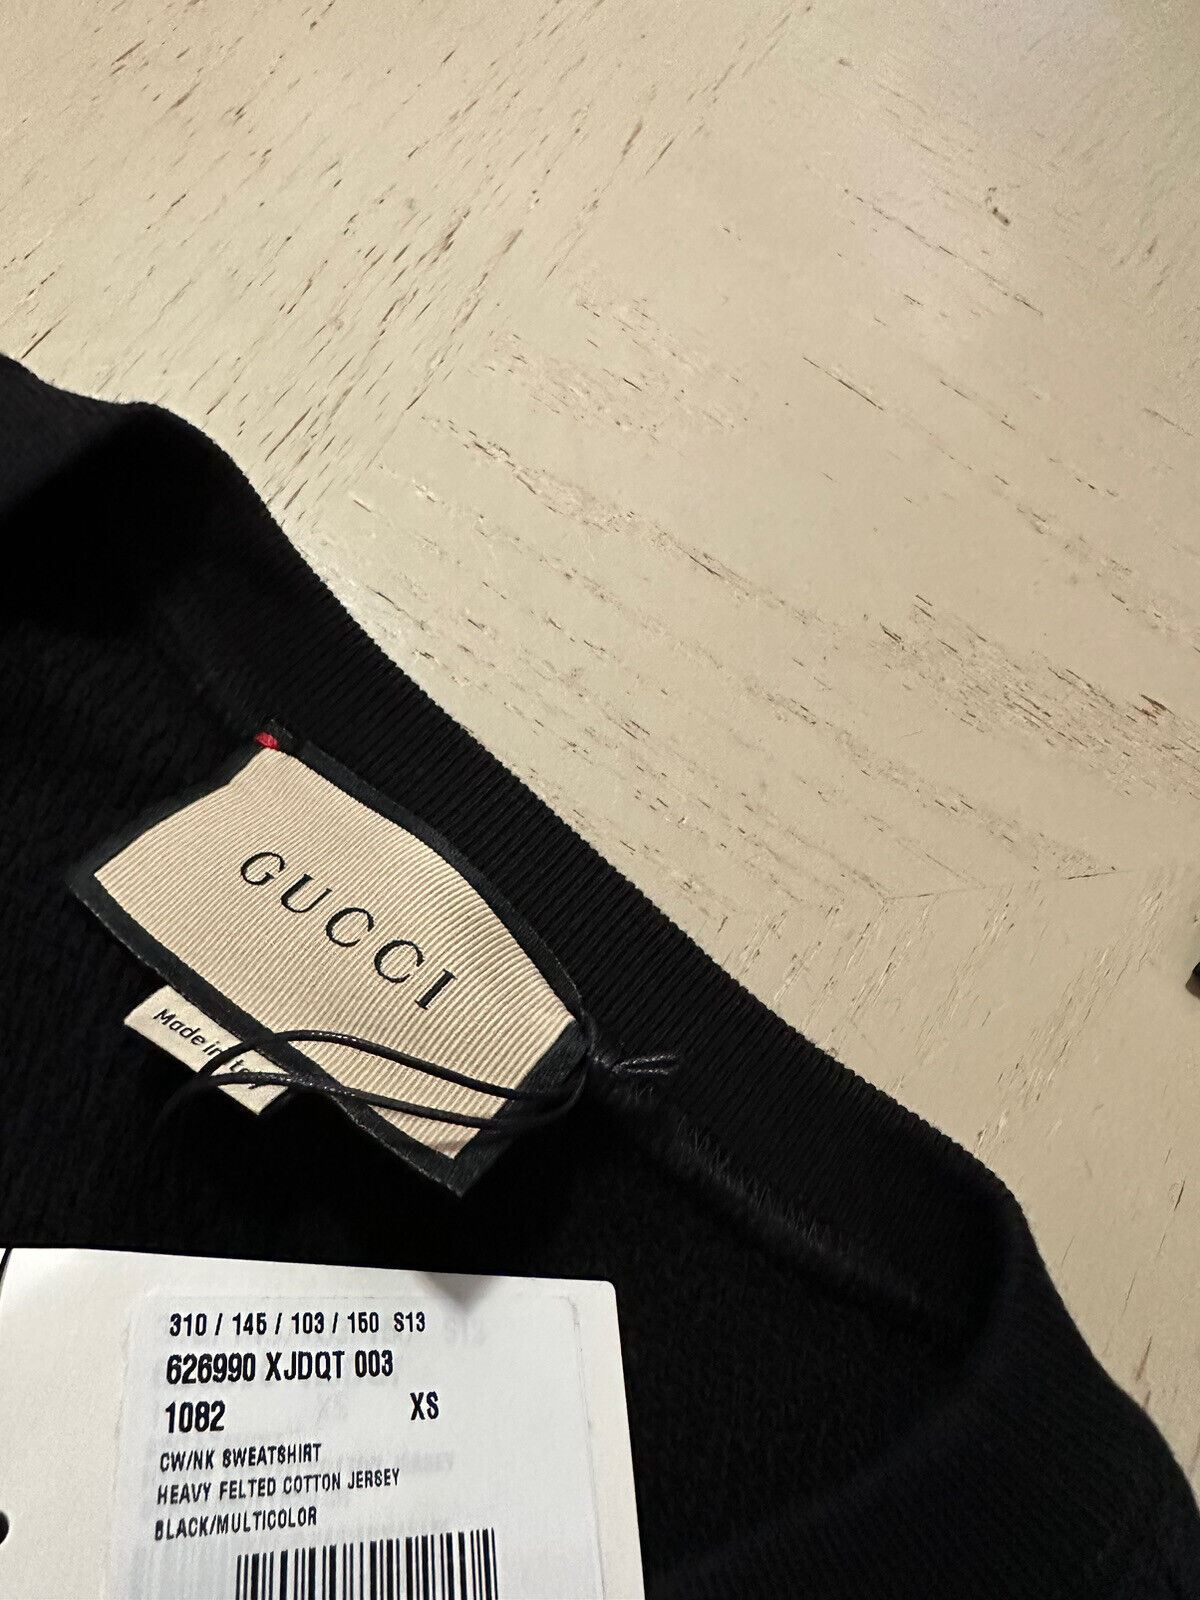 NWT $1250 Gucci Men Oversized Crewneck Pullover Sweater Black XS Italy